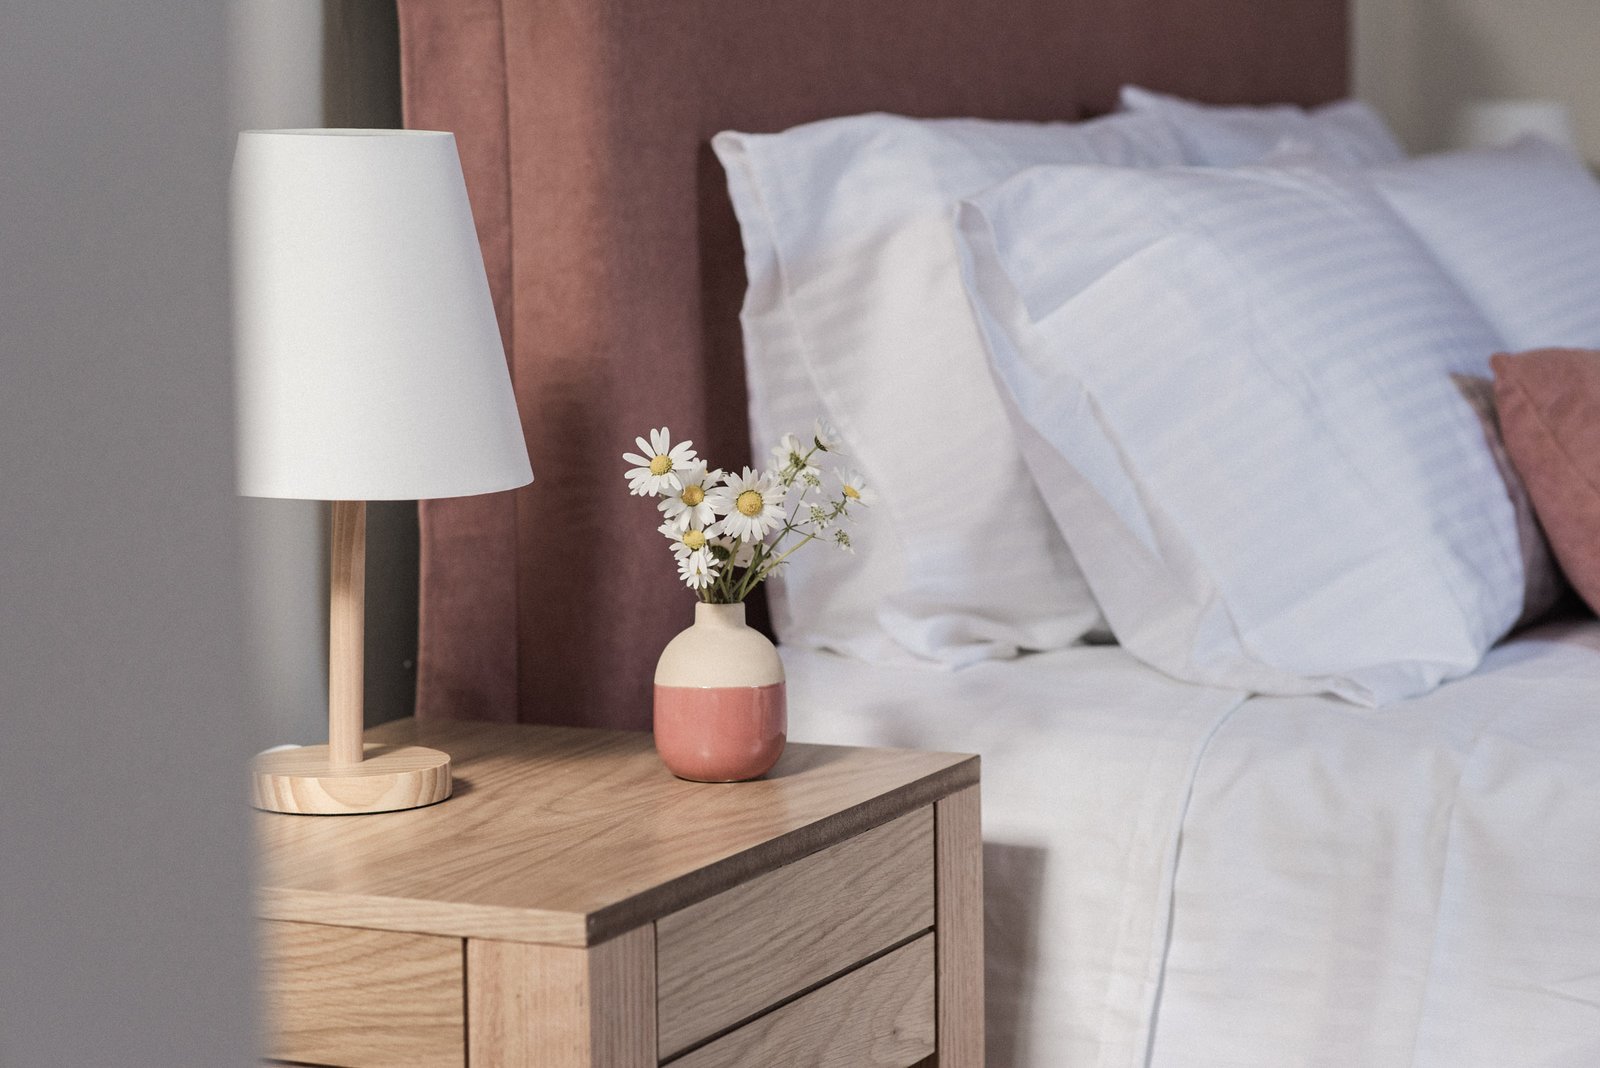 Bed with pale pink linens and bedside table decorated with a vase of fresh daisies